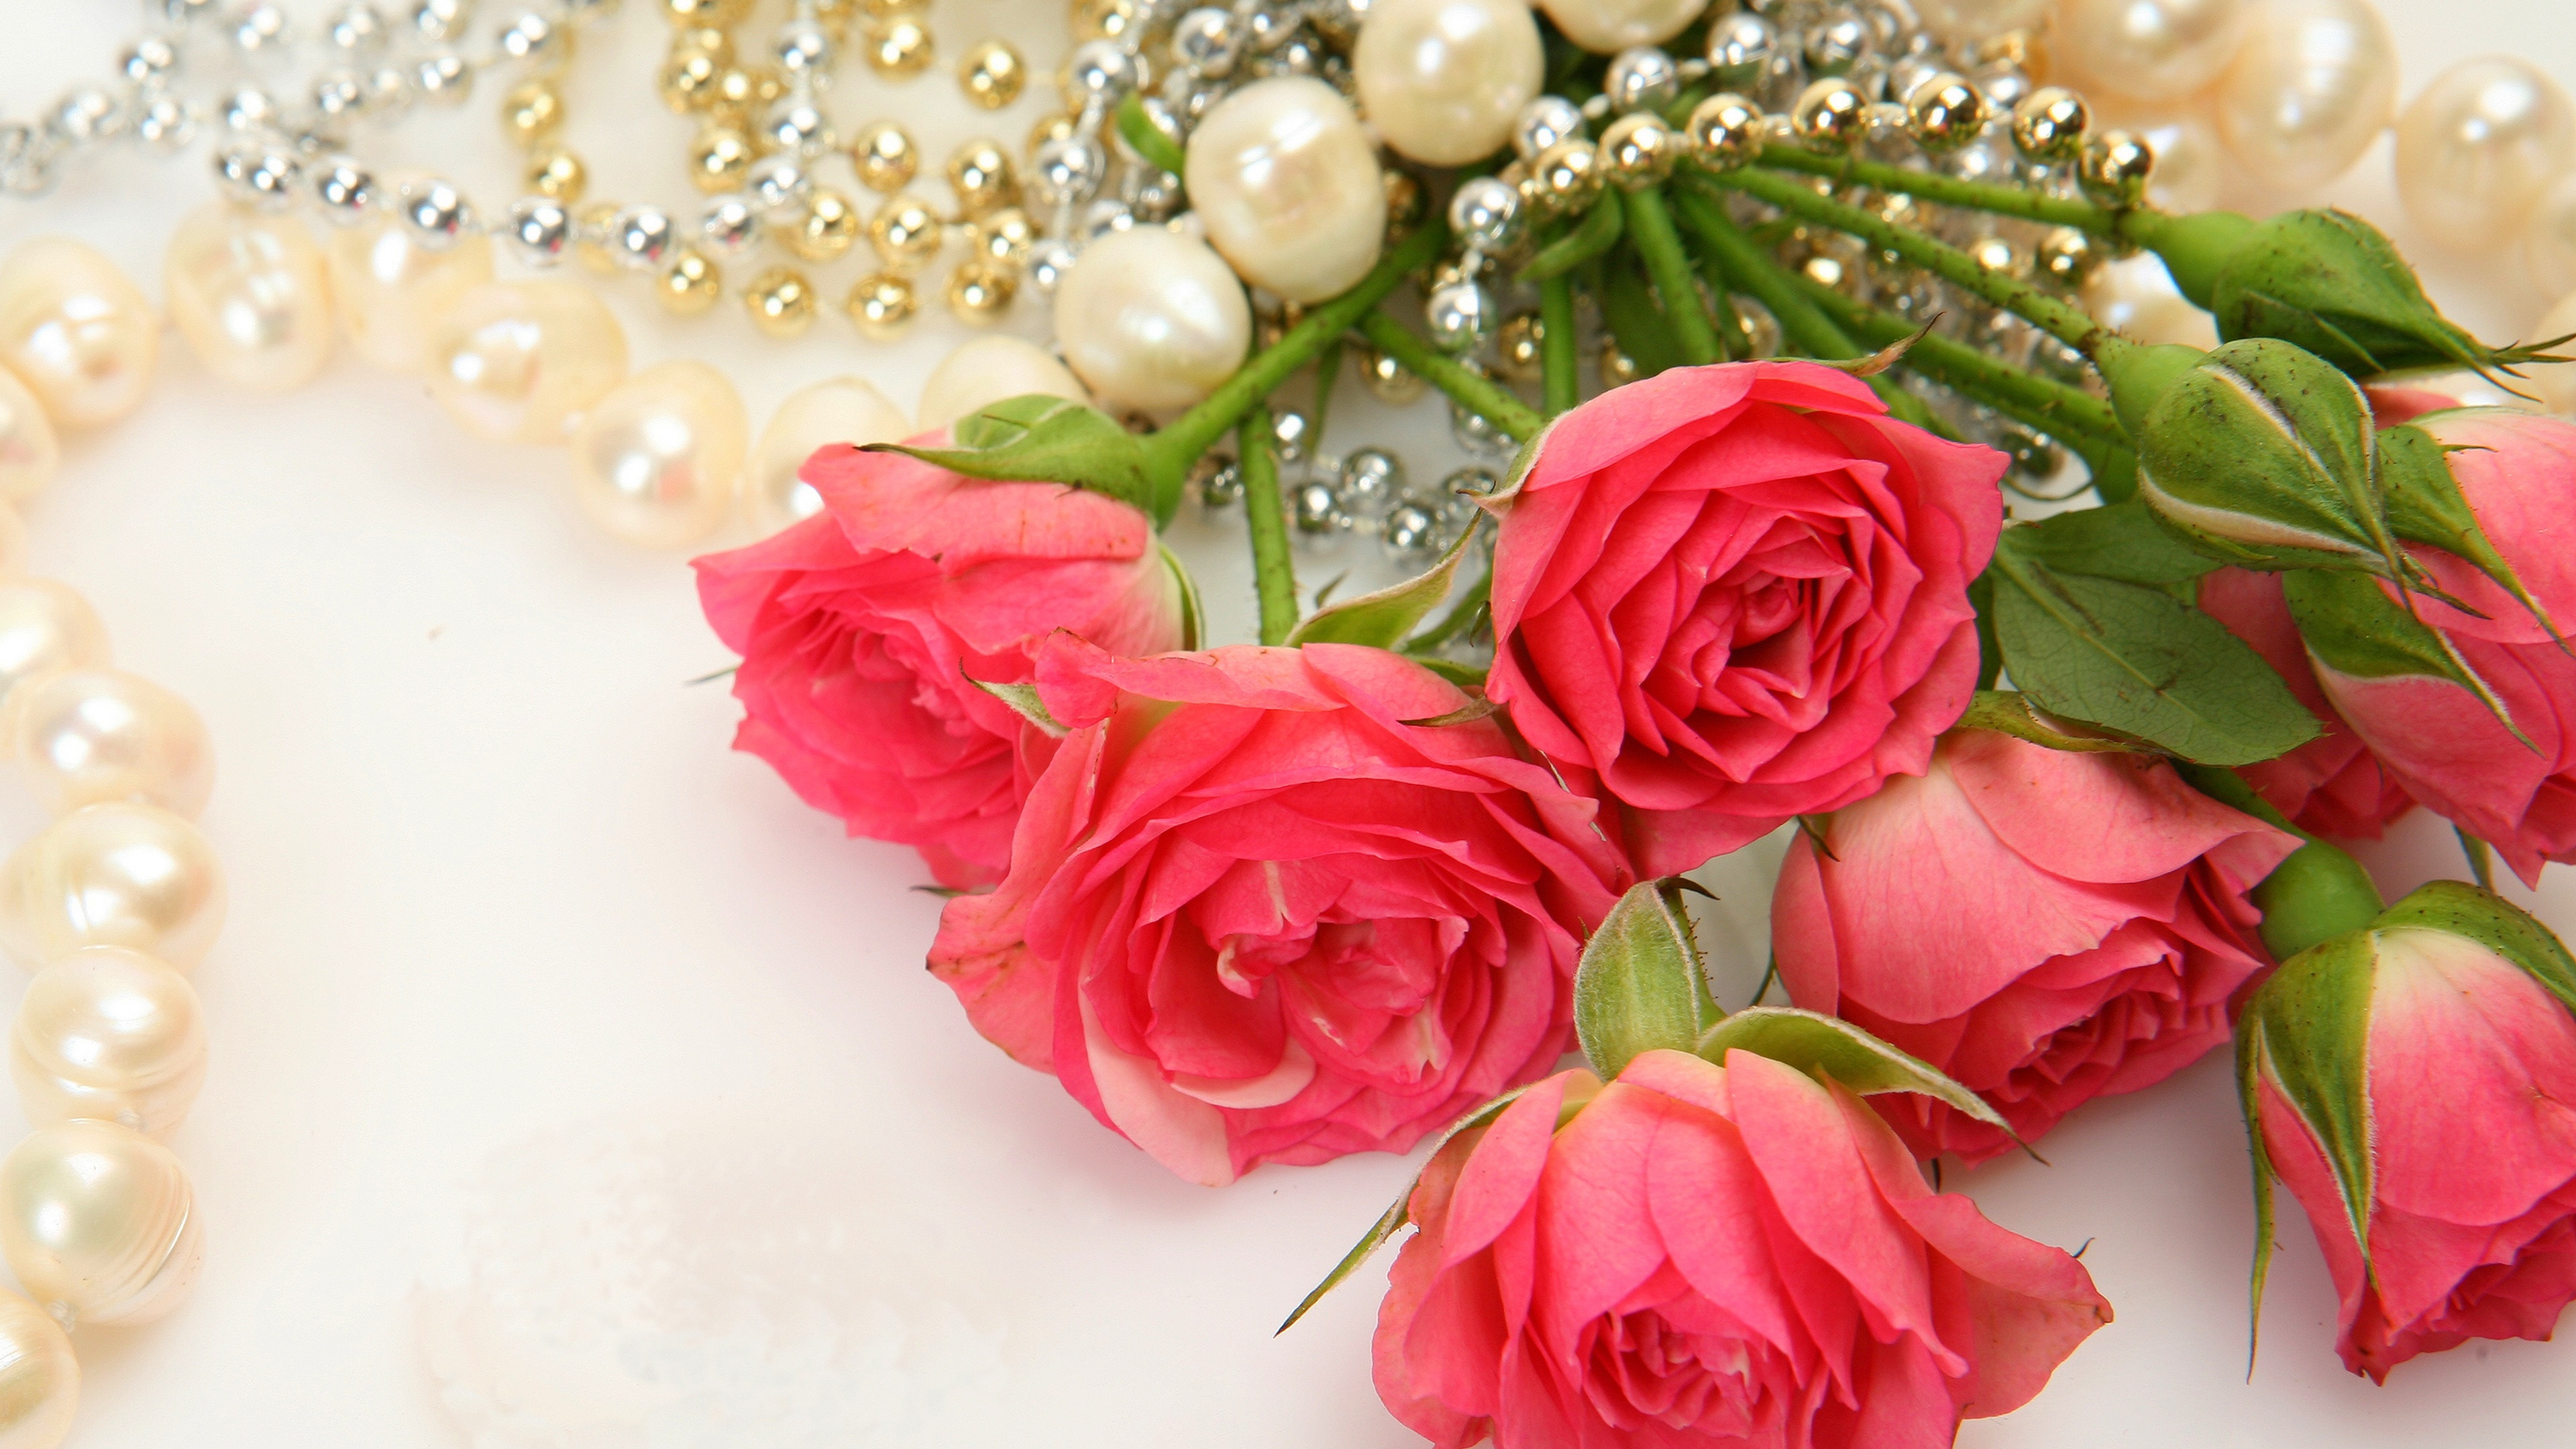 Wallpaper Red Flowers, Roses, Pearl Necklace - Cute Pics Of Flowers Roses - HD Wallpaper 